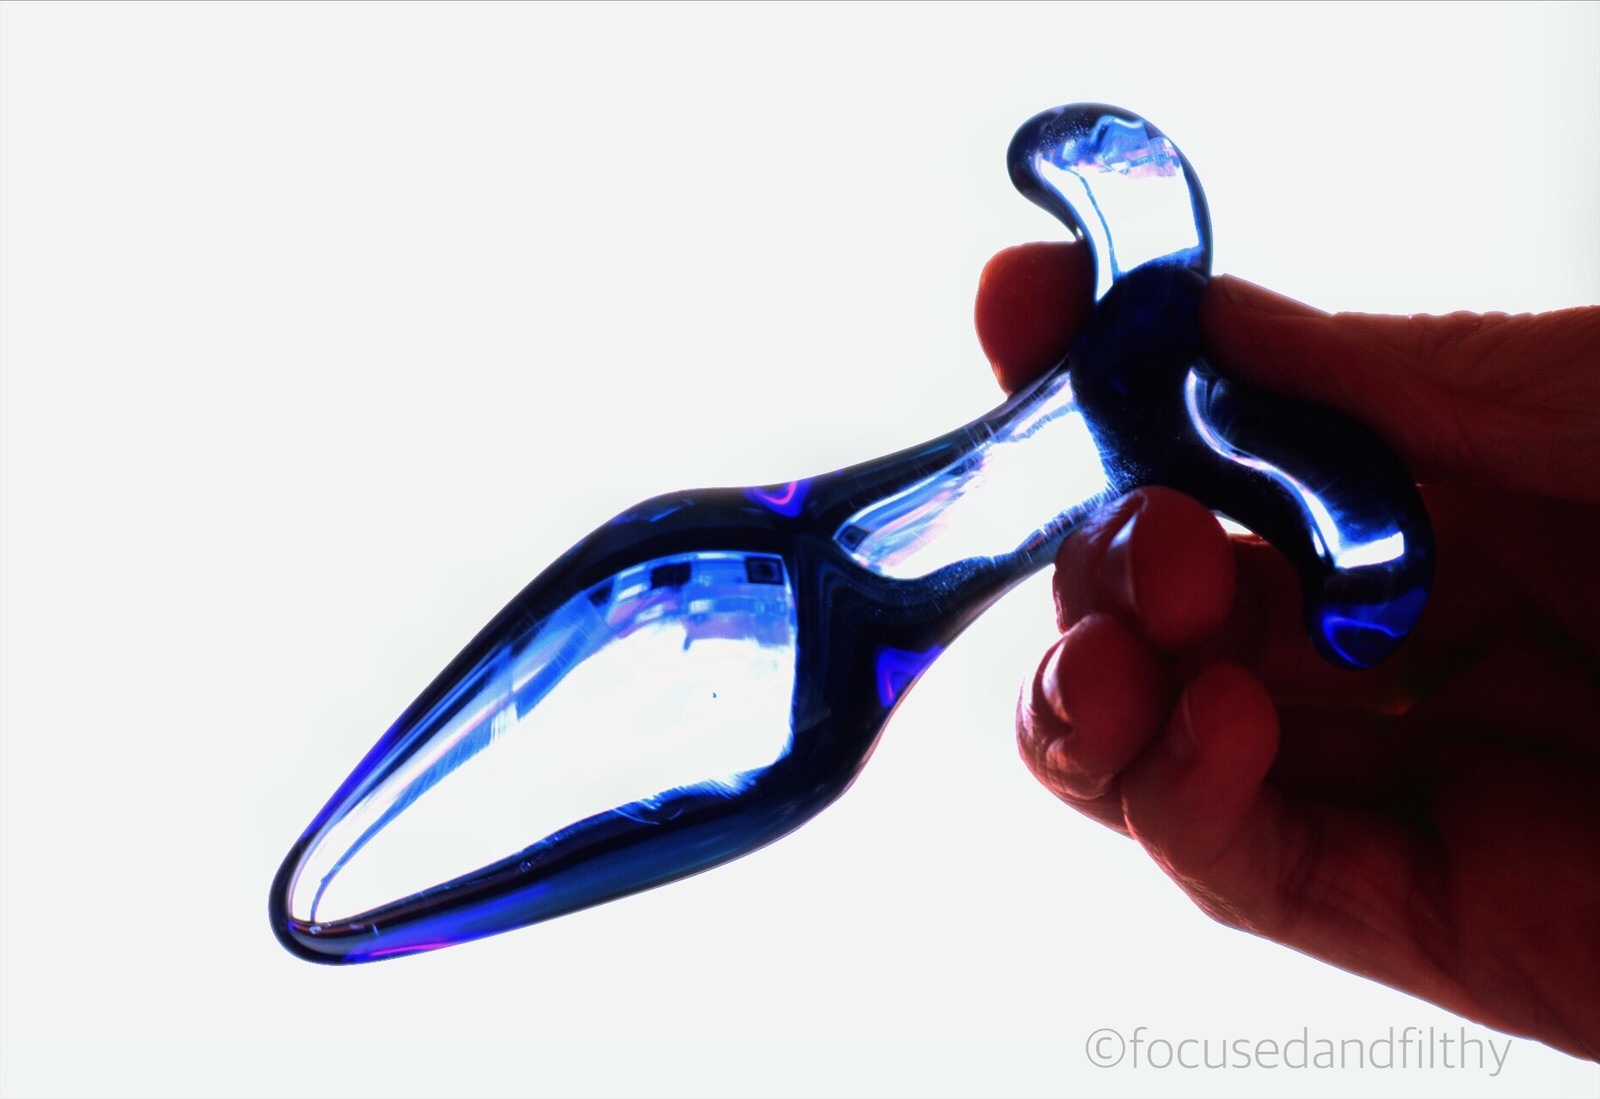 Colour photograph of a blue glass butt plug being held in a hand looking slightly see through